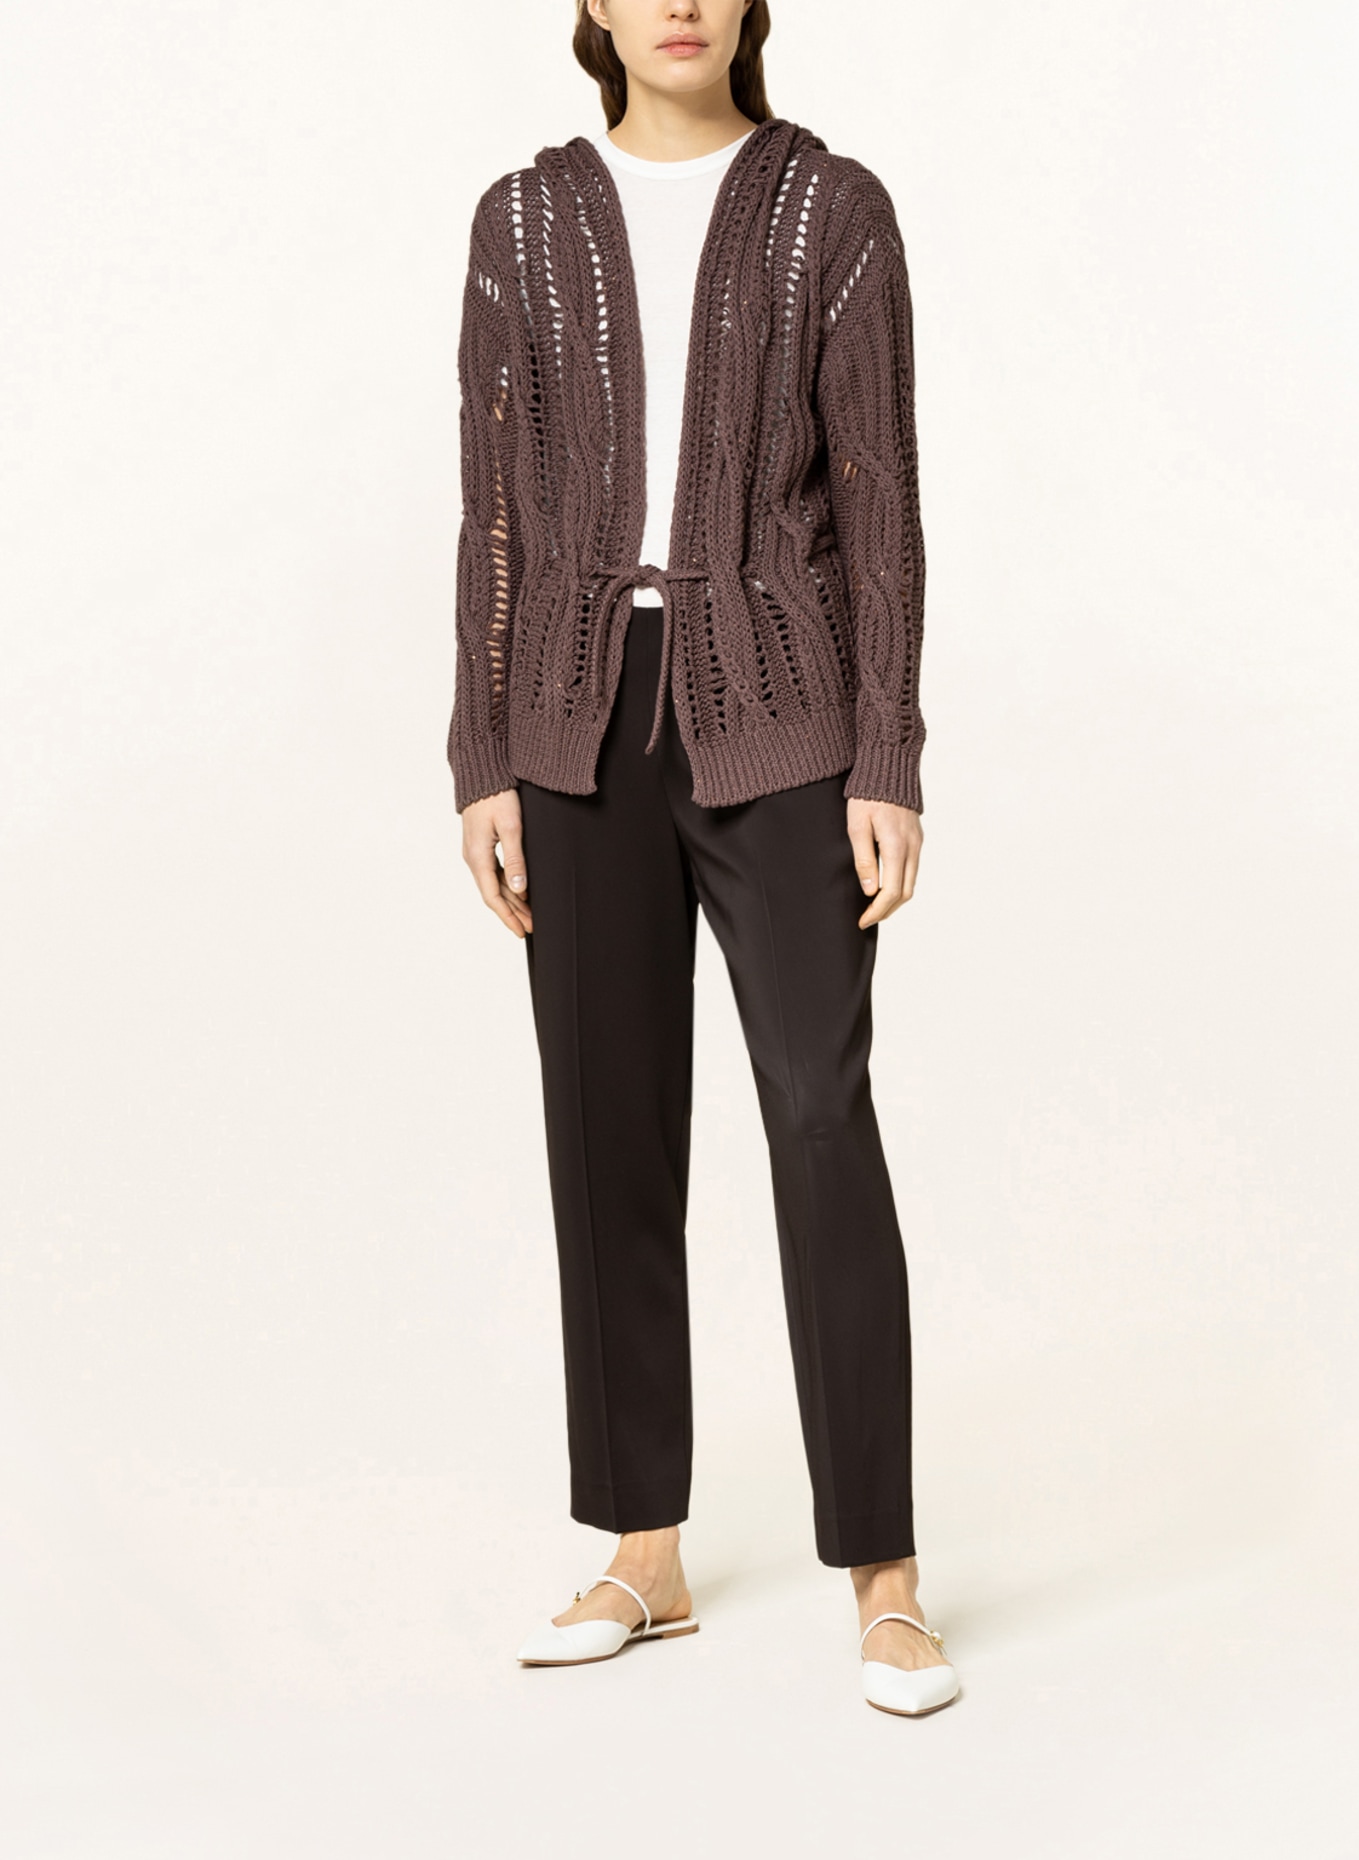 FABIANA FILIPPI Knit cardigan with sequins, Color: DARK BROWN (Image 2)